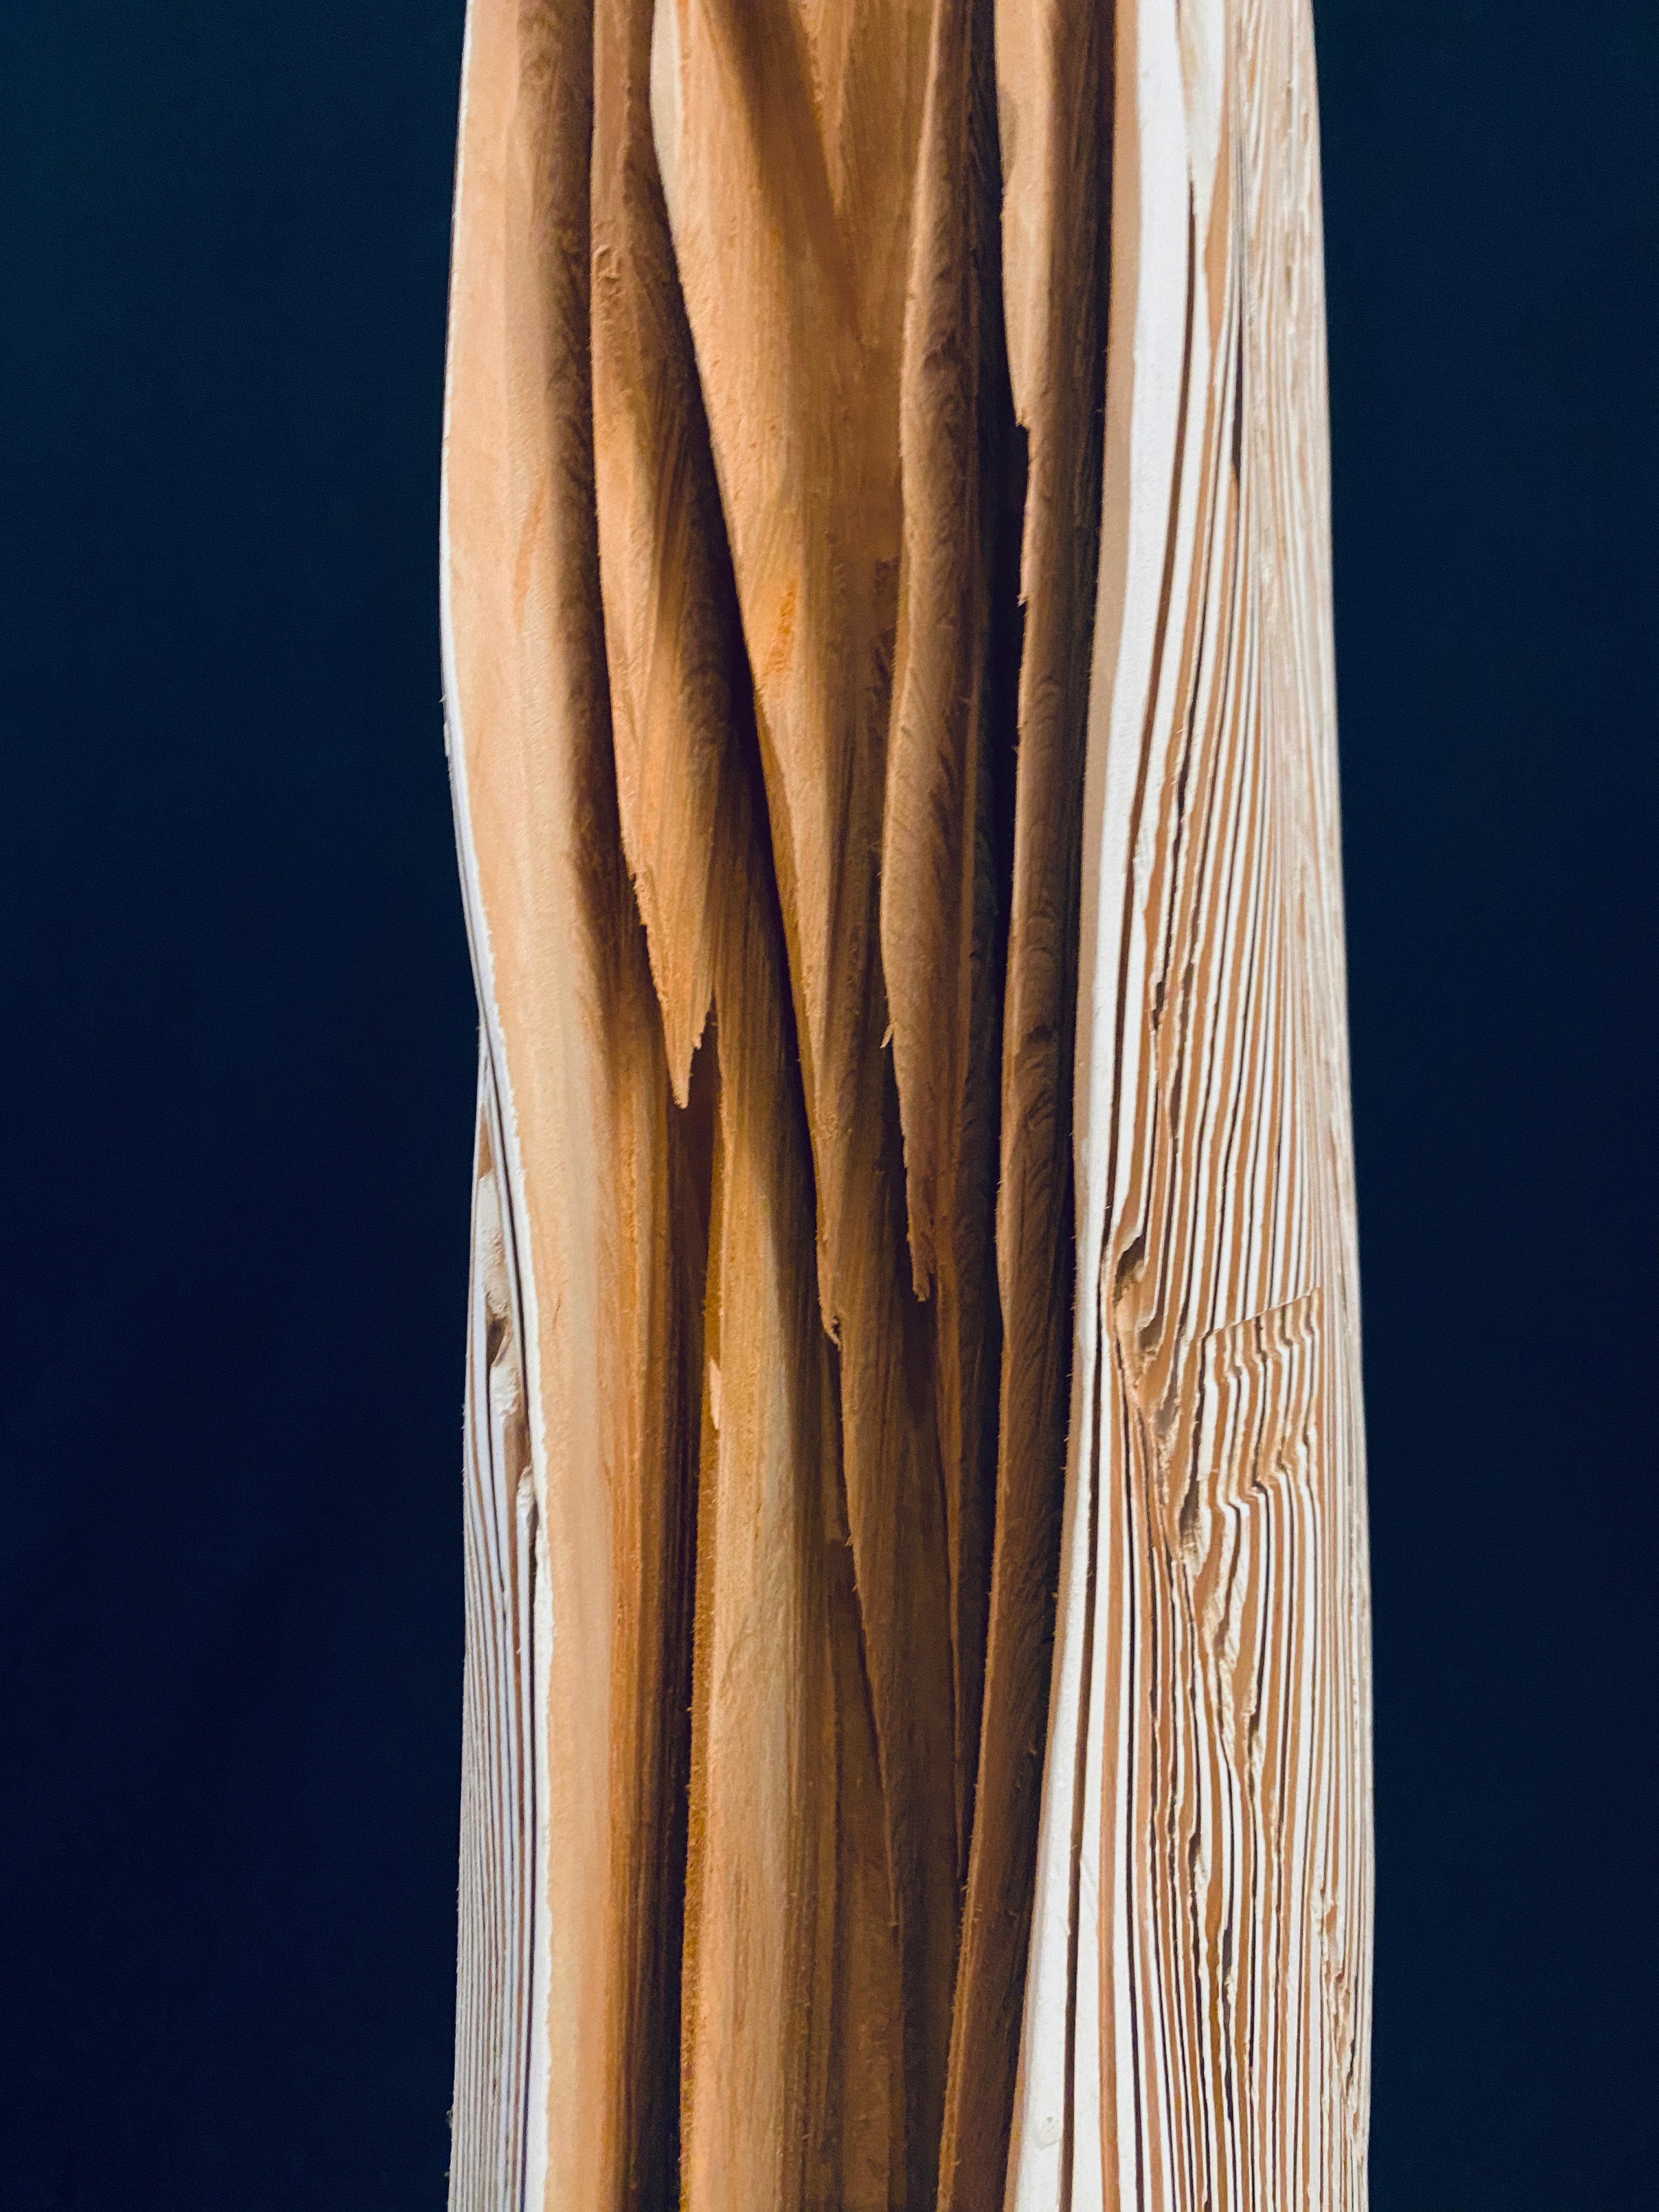 Untitled, Paulo Neves, Contemporary, Cedar wood painted and carved, White For Sale 3